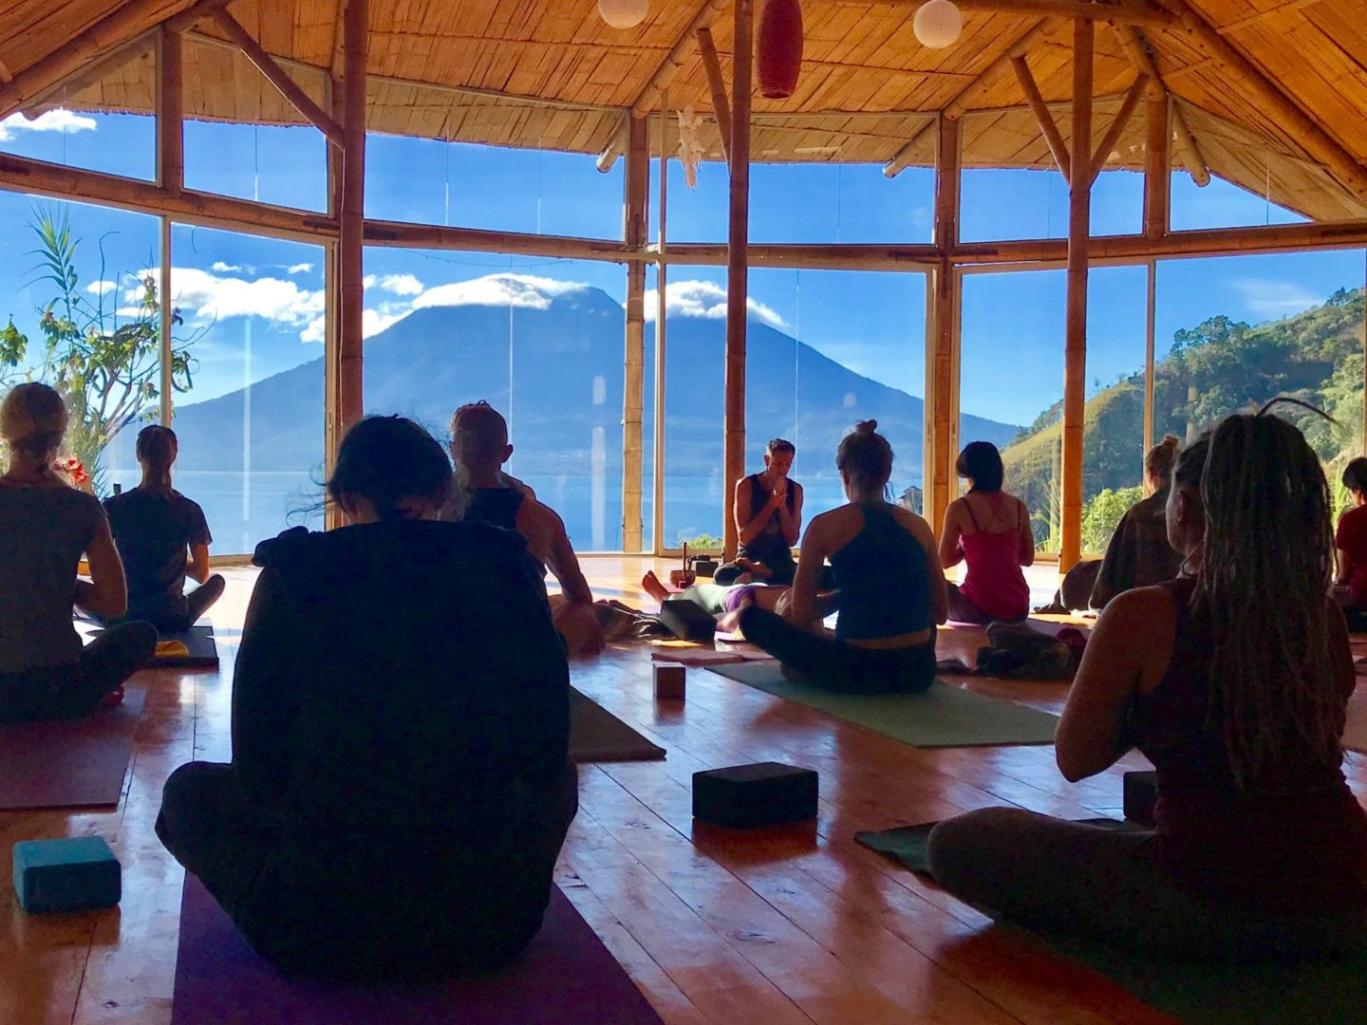 What Are Some Of The Most Popular Destinations For Yoga And Wellness Retreats?